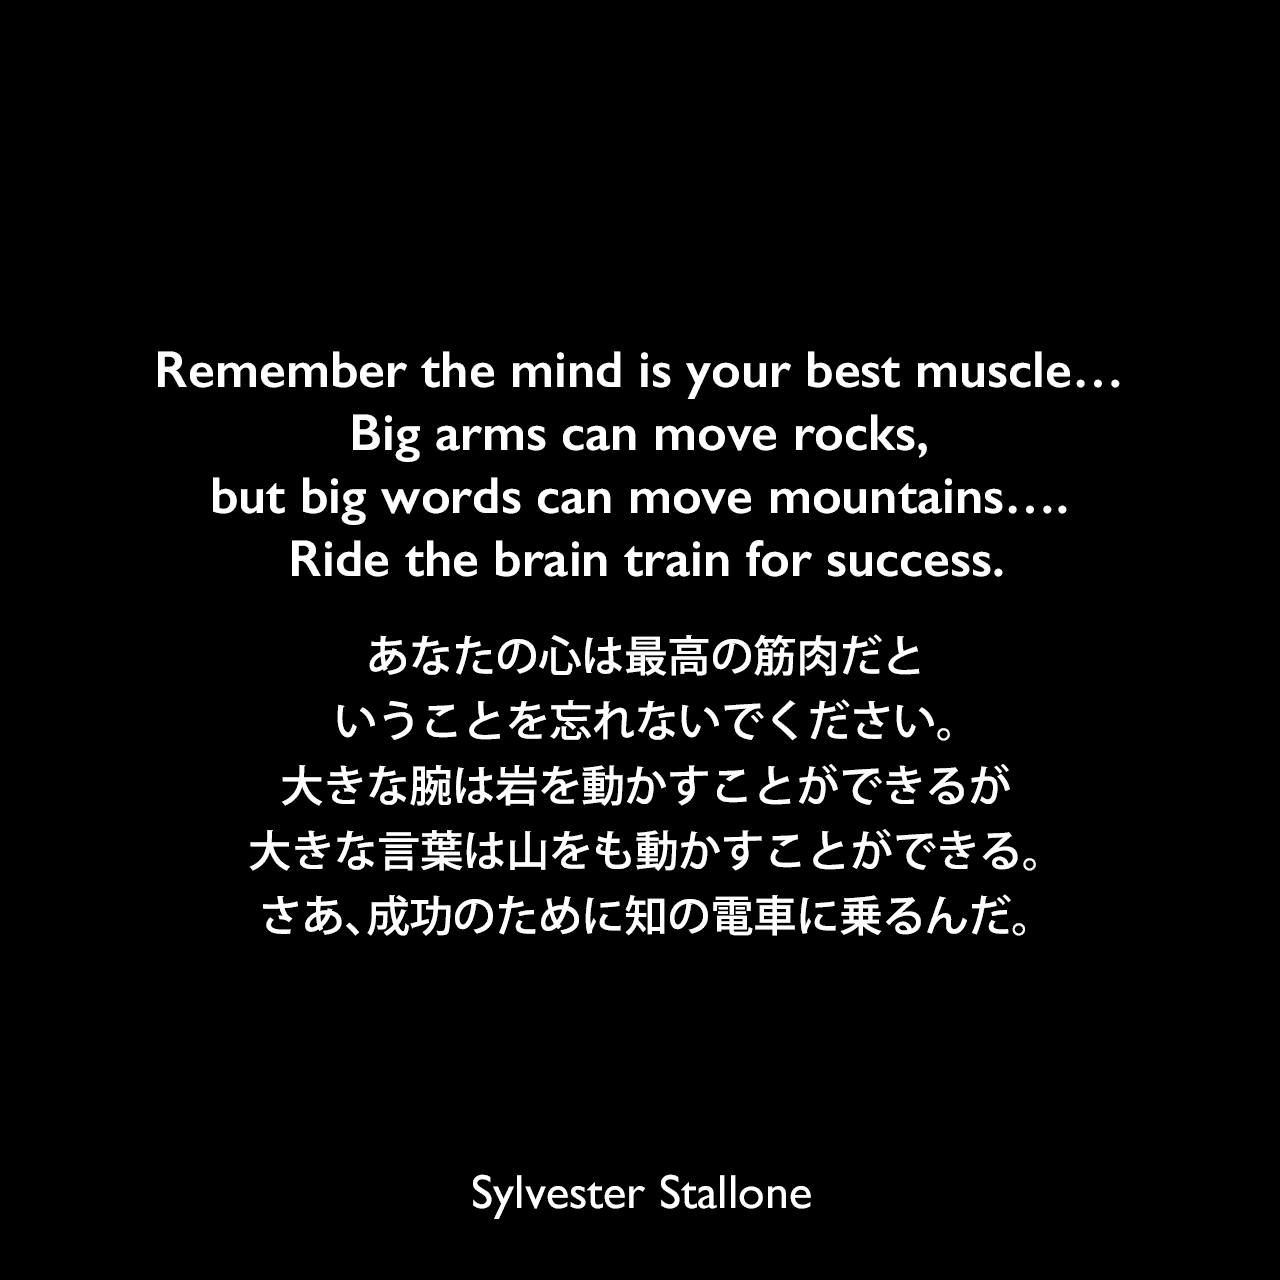 Remember the mind is your best muscle… Big arms can move rocks, but big words can move mountains…. Ride the brain train for success.あなたの心は最高の筋肉だということを忘れないでください。大きな腕は岩を動かすことができるが、大きな言葉は山をも動かすことができる。さあ、成功のために知の電車に乗るんだ。Sylvester Stallone